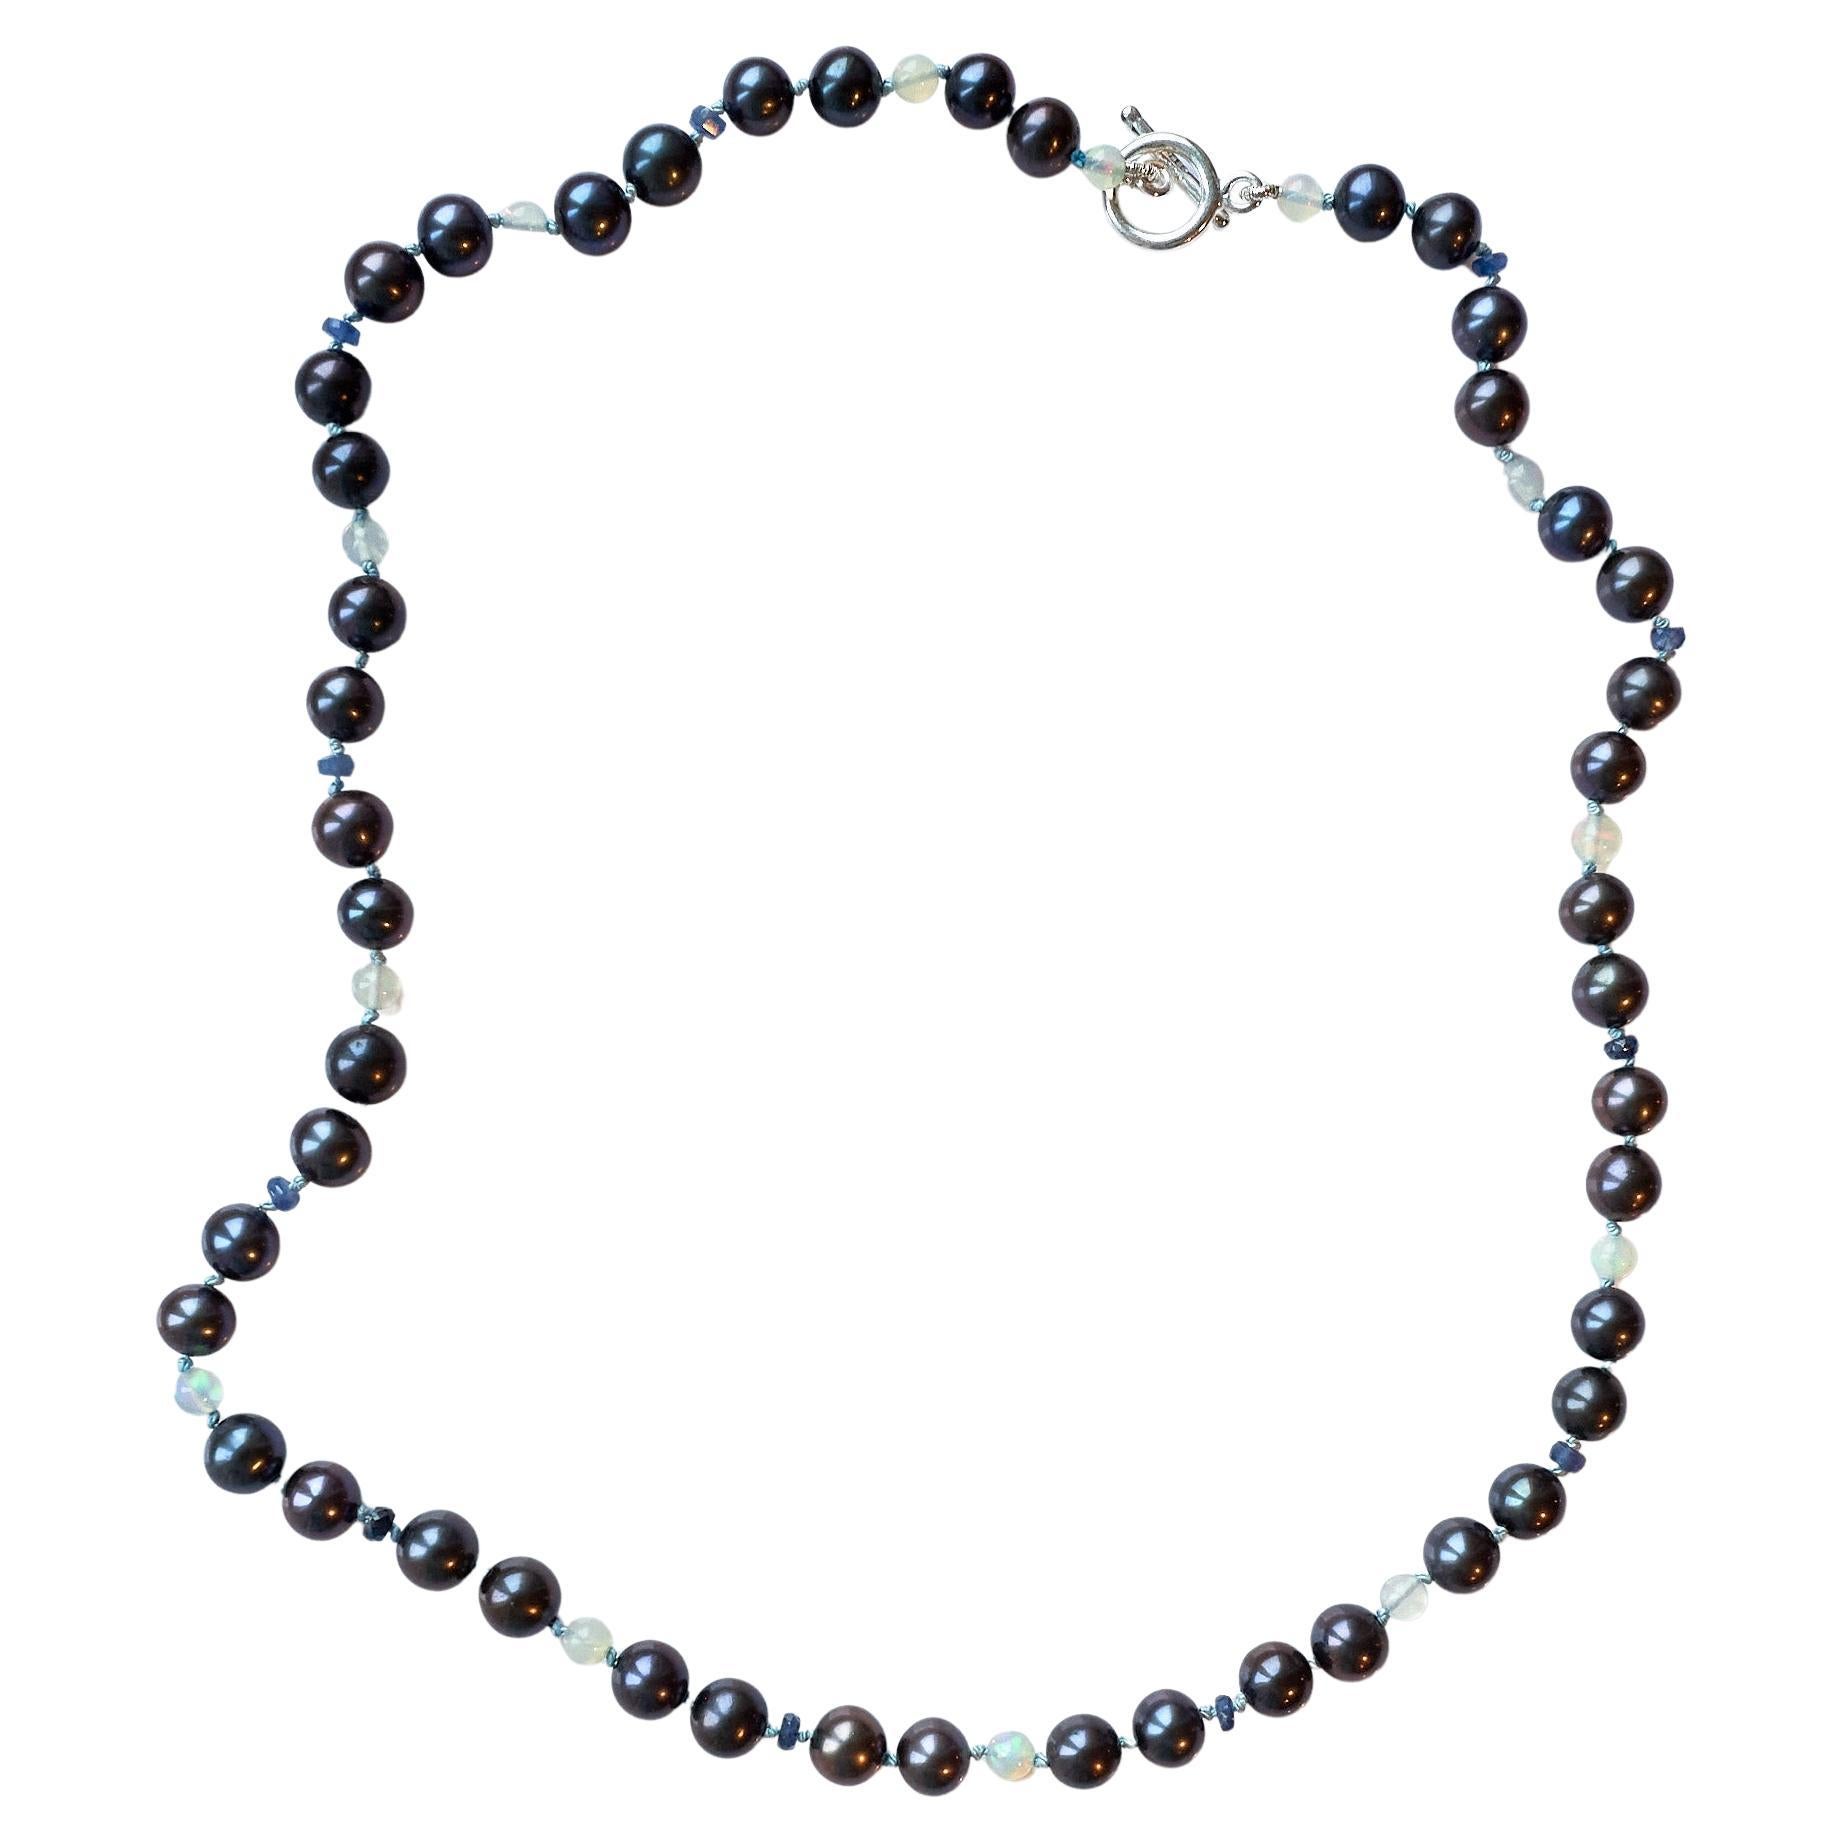 Black Pearl Blue Sapphire Opal Beaded Necklace Lilac Silk Thread Sillver